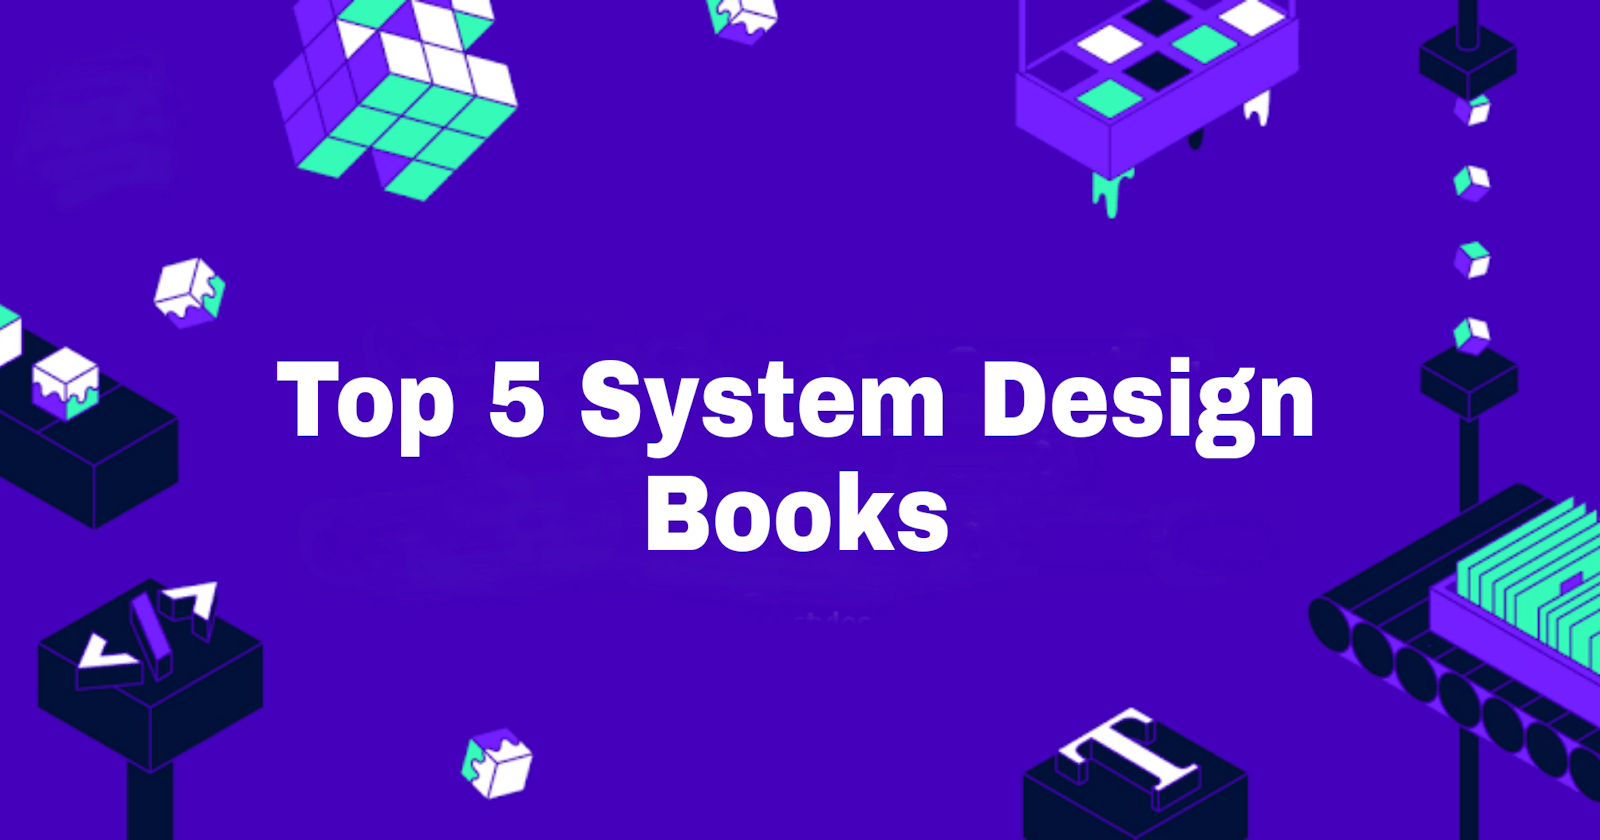 Top 5 System Design Books, You should know about them